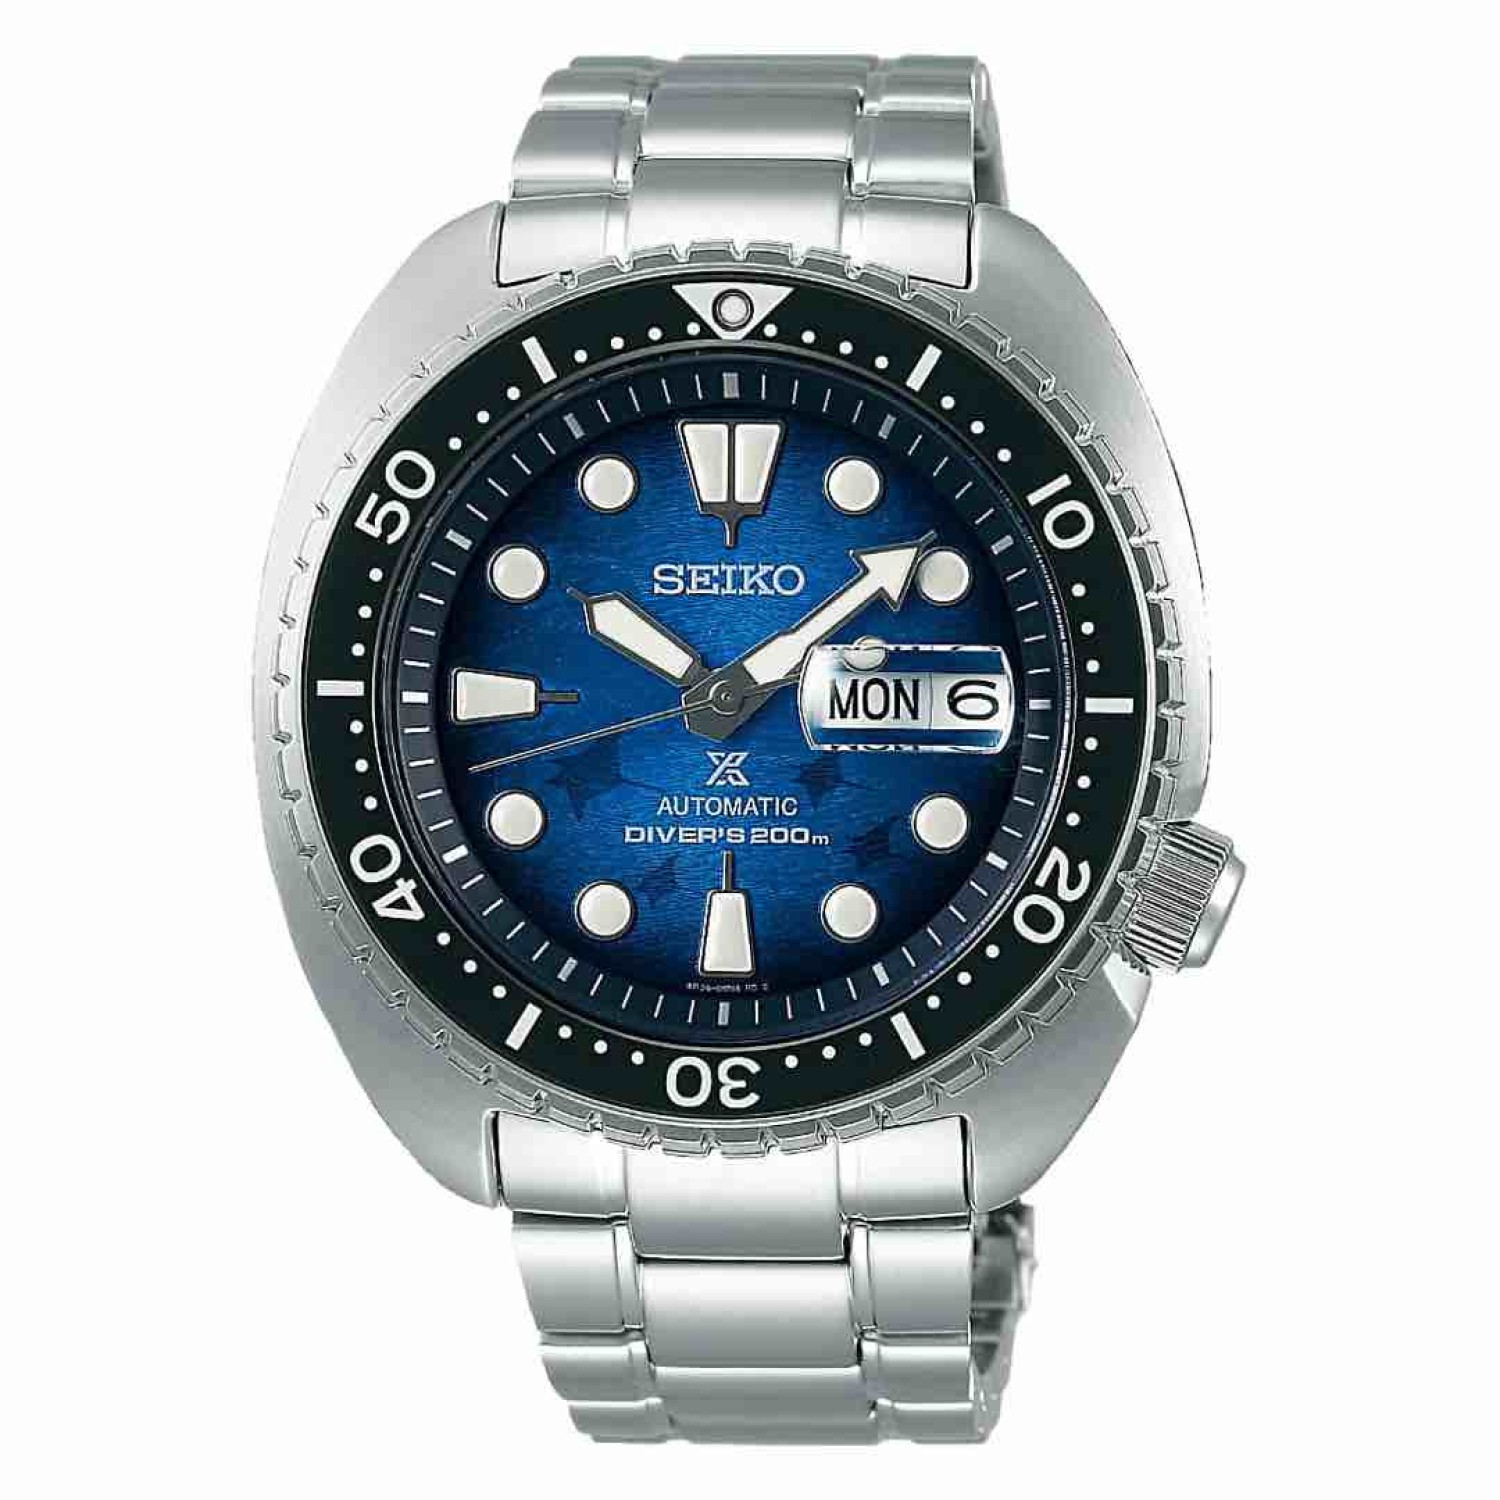 SRPE39K1 SEIKO Prospex Save The Ocean Manta Ray Watch. Prospex Save the Ocean Turtle Scuba Diver This Prospex watch is from Seikos Save The Ocean collection. The dial of this special edition timepiece represents the view of the ocean as seen by the 5m dee